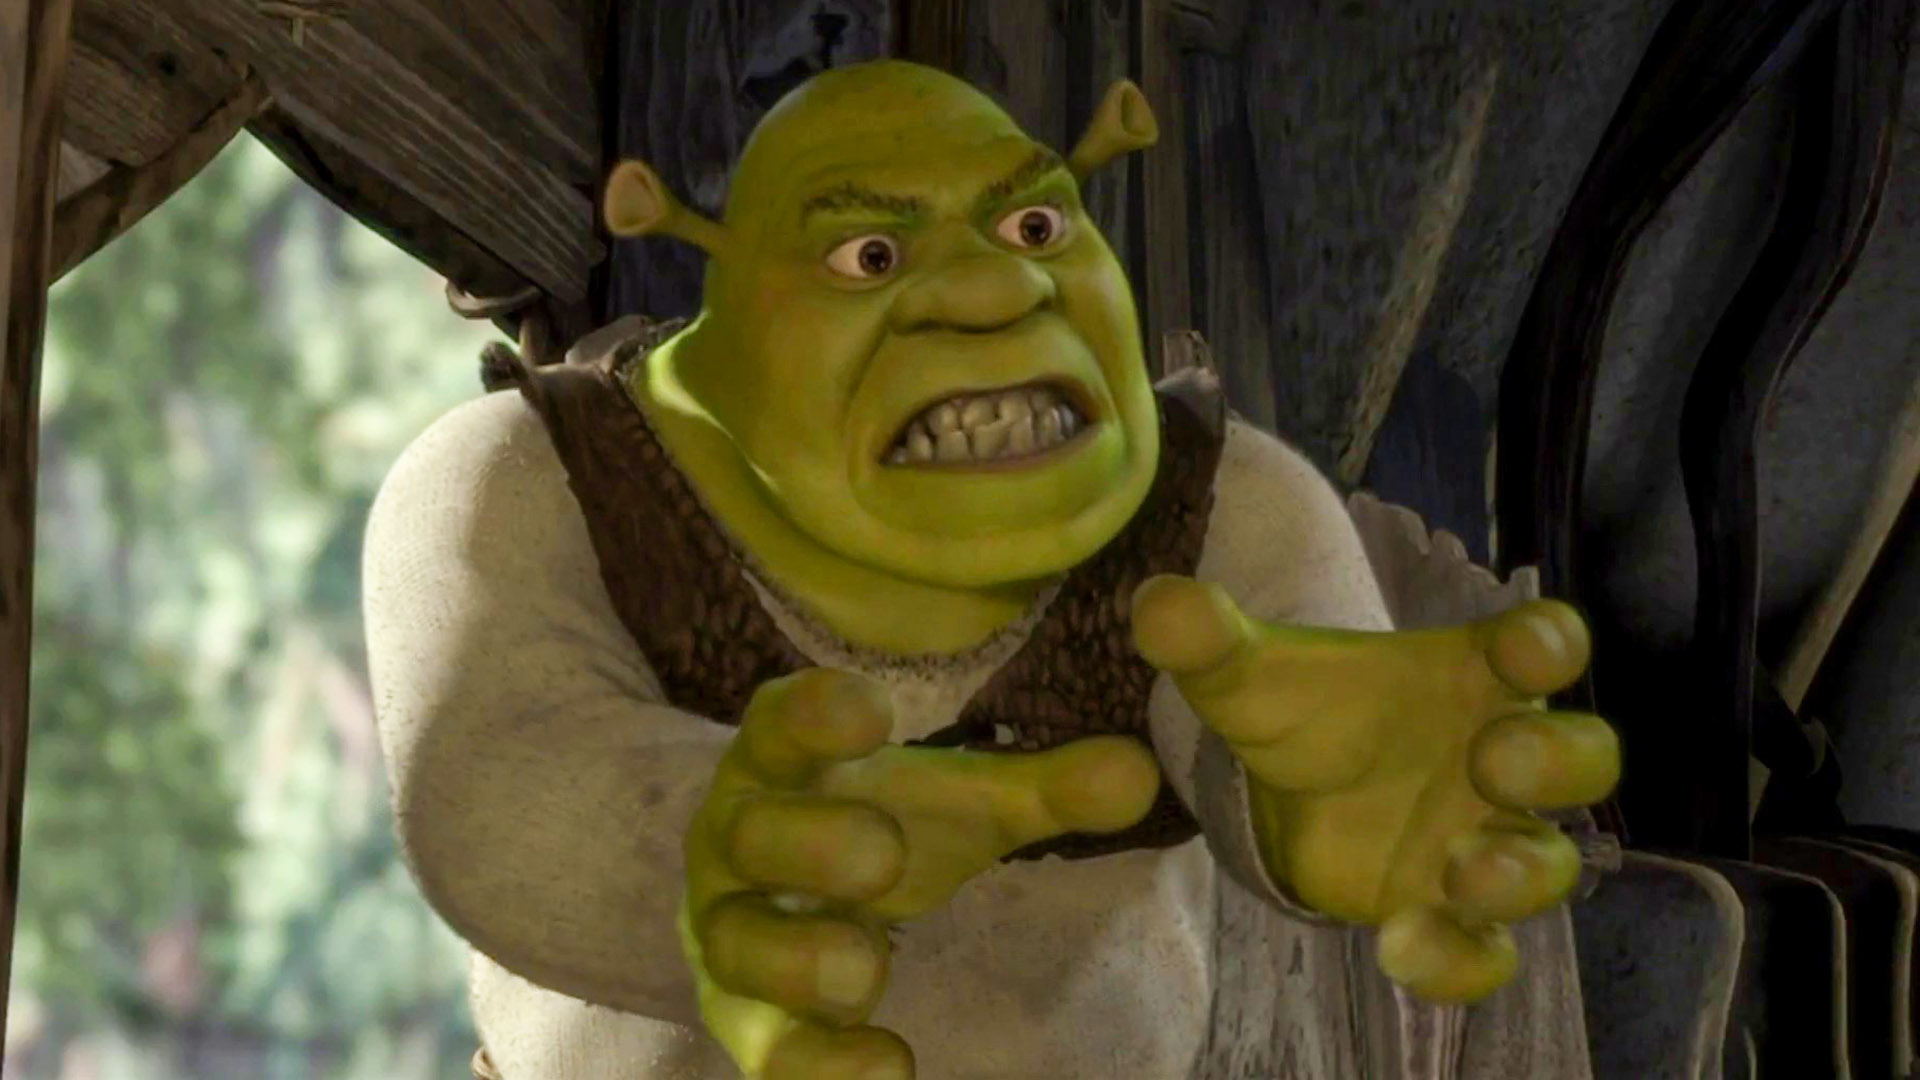 Shrek 5' is in the works with franchise's original cast